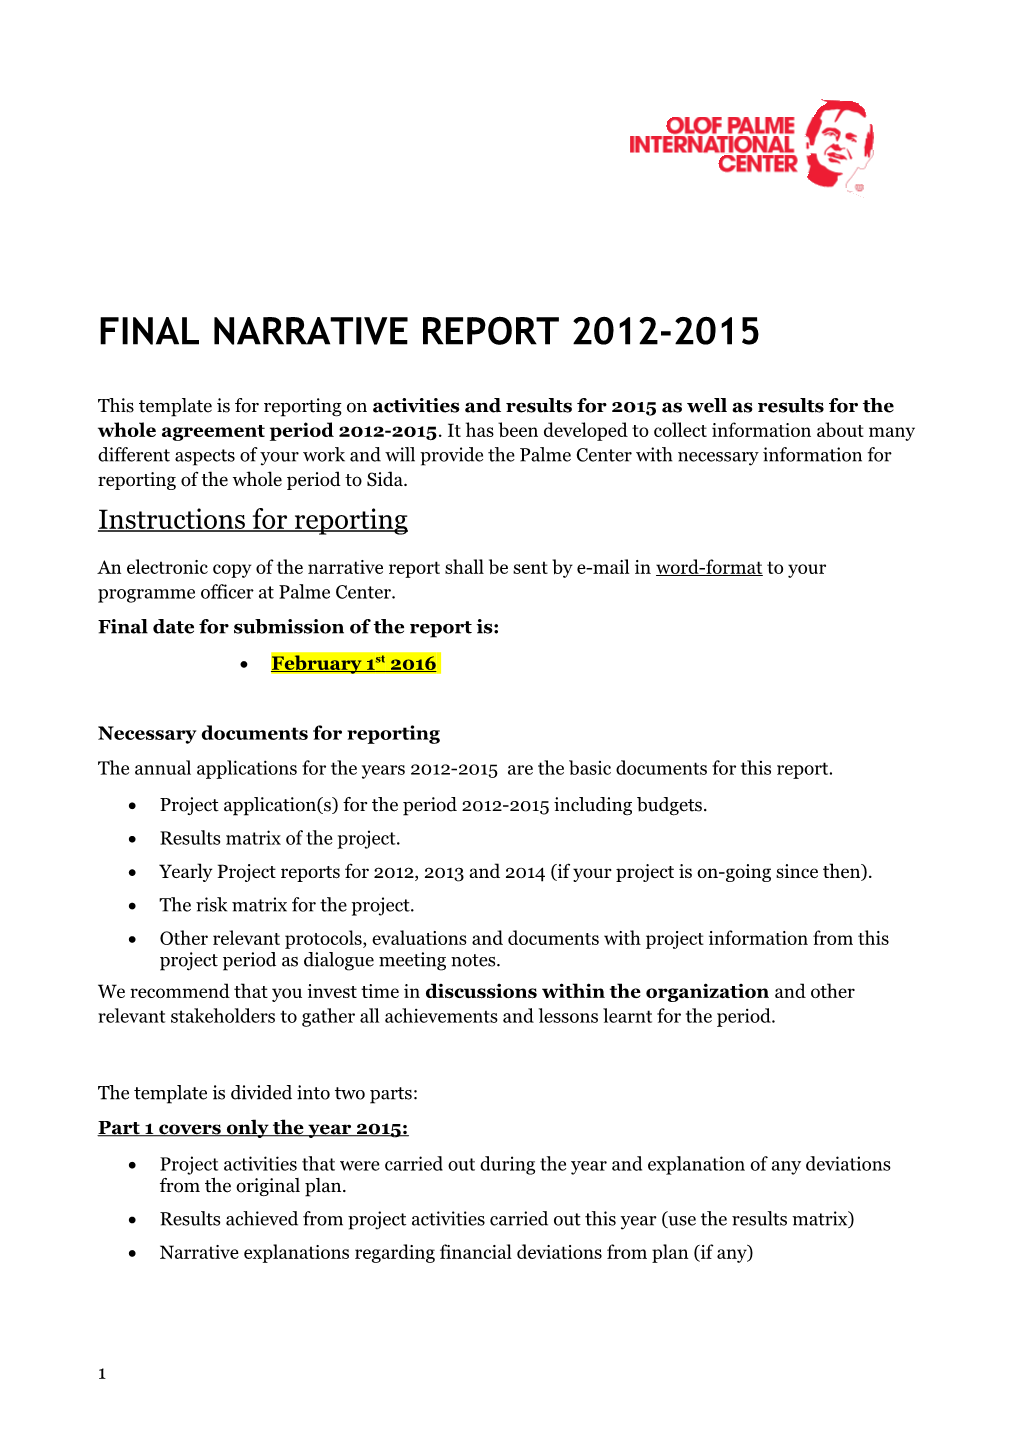 Template for Narrative Final Report 2012-2014 to Sida Including Questions Regarding Yearly